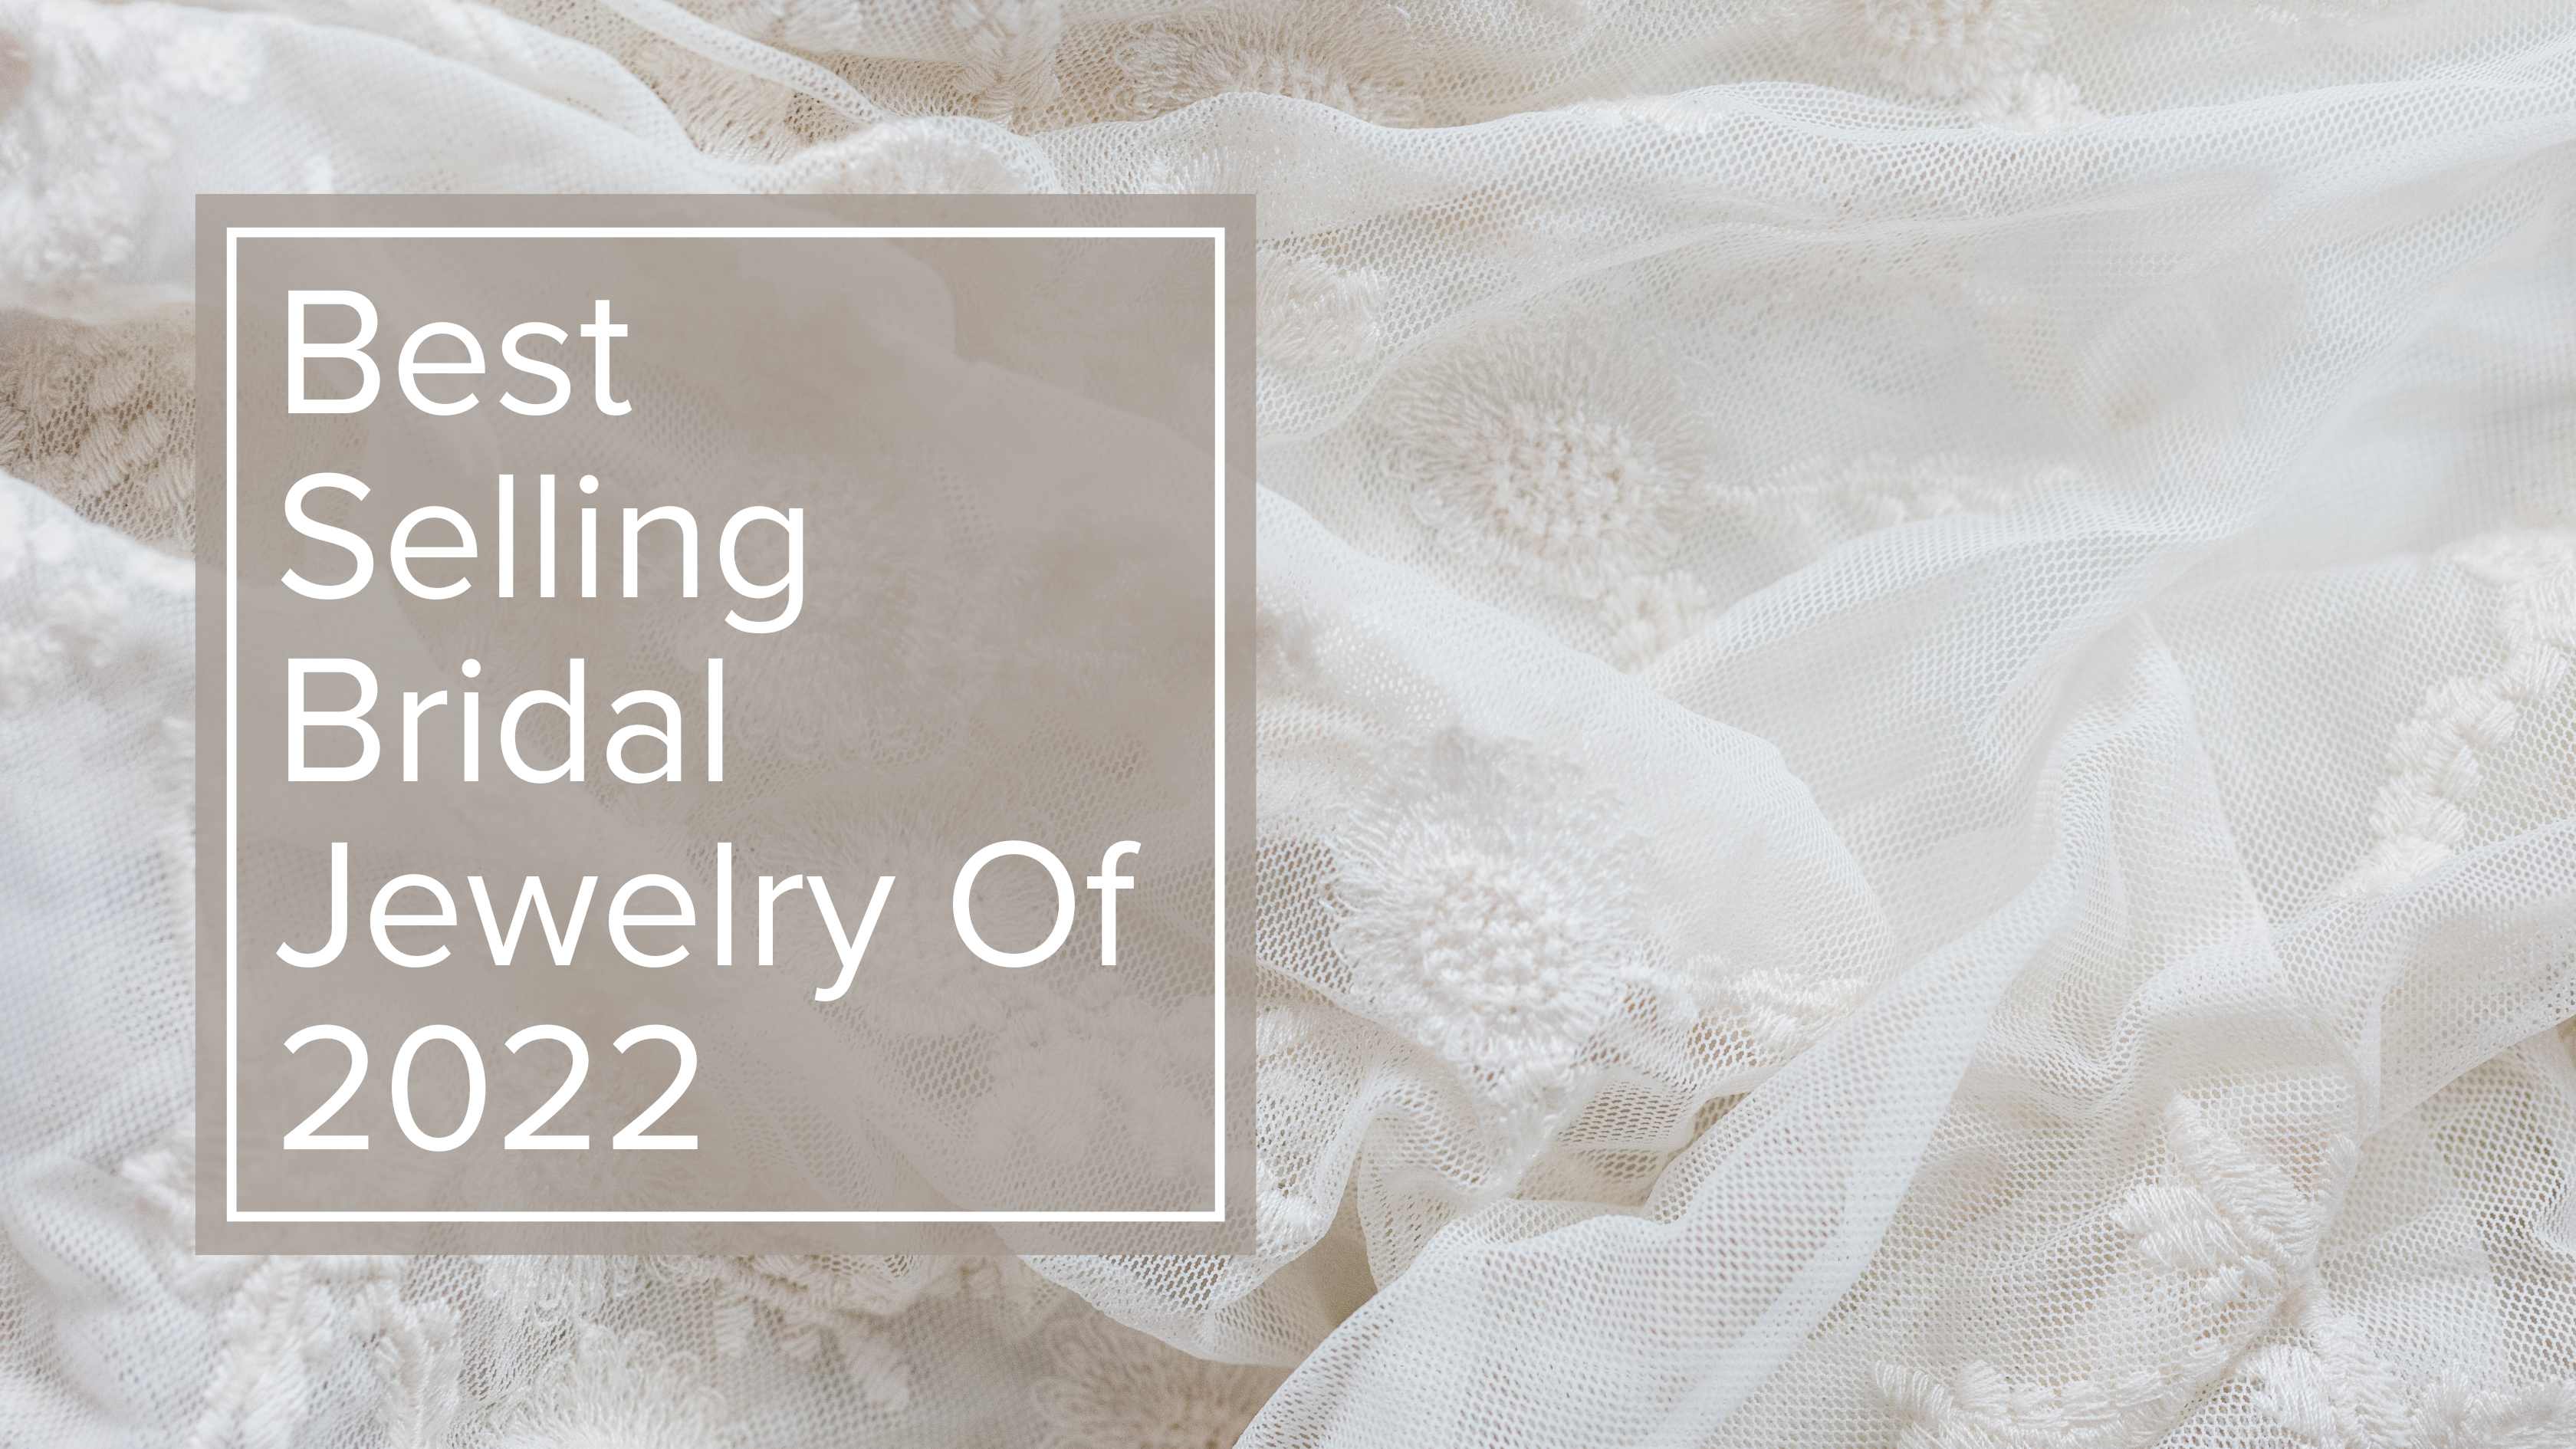 Best Selling Bridal Jewelry of 2022